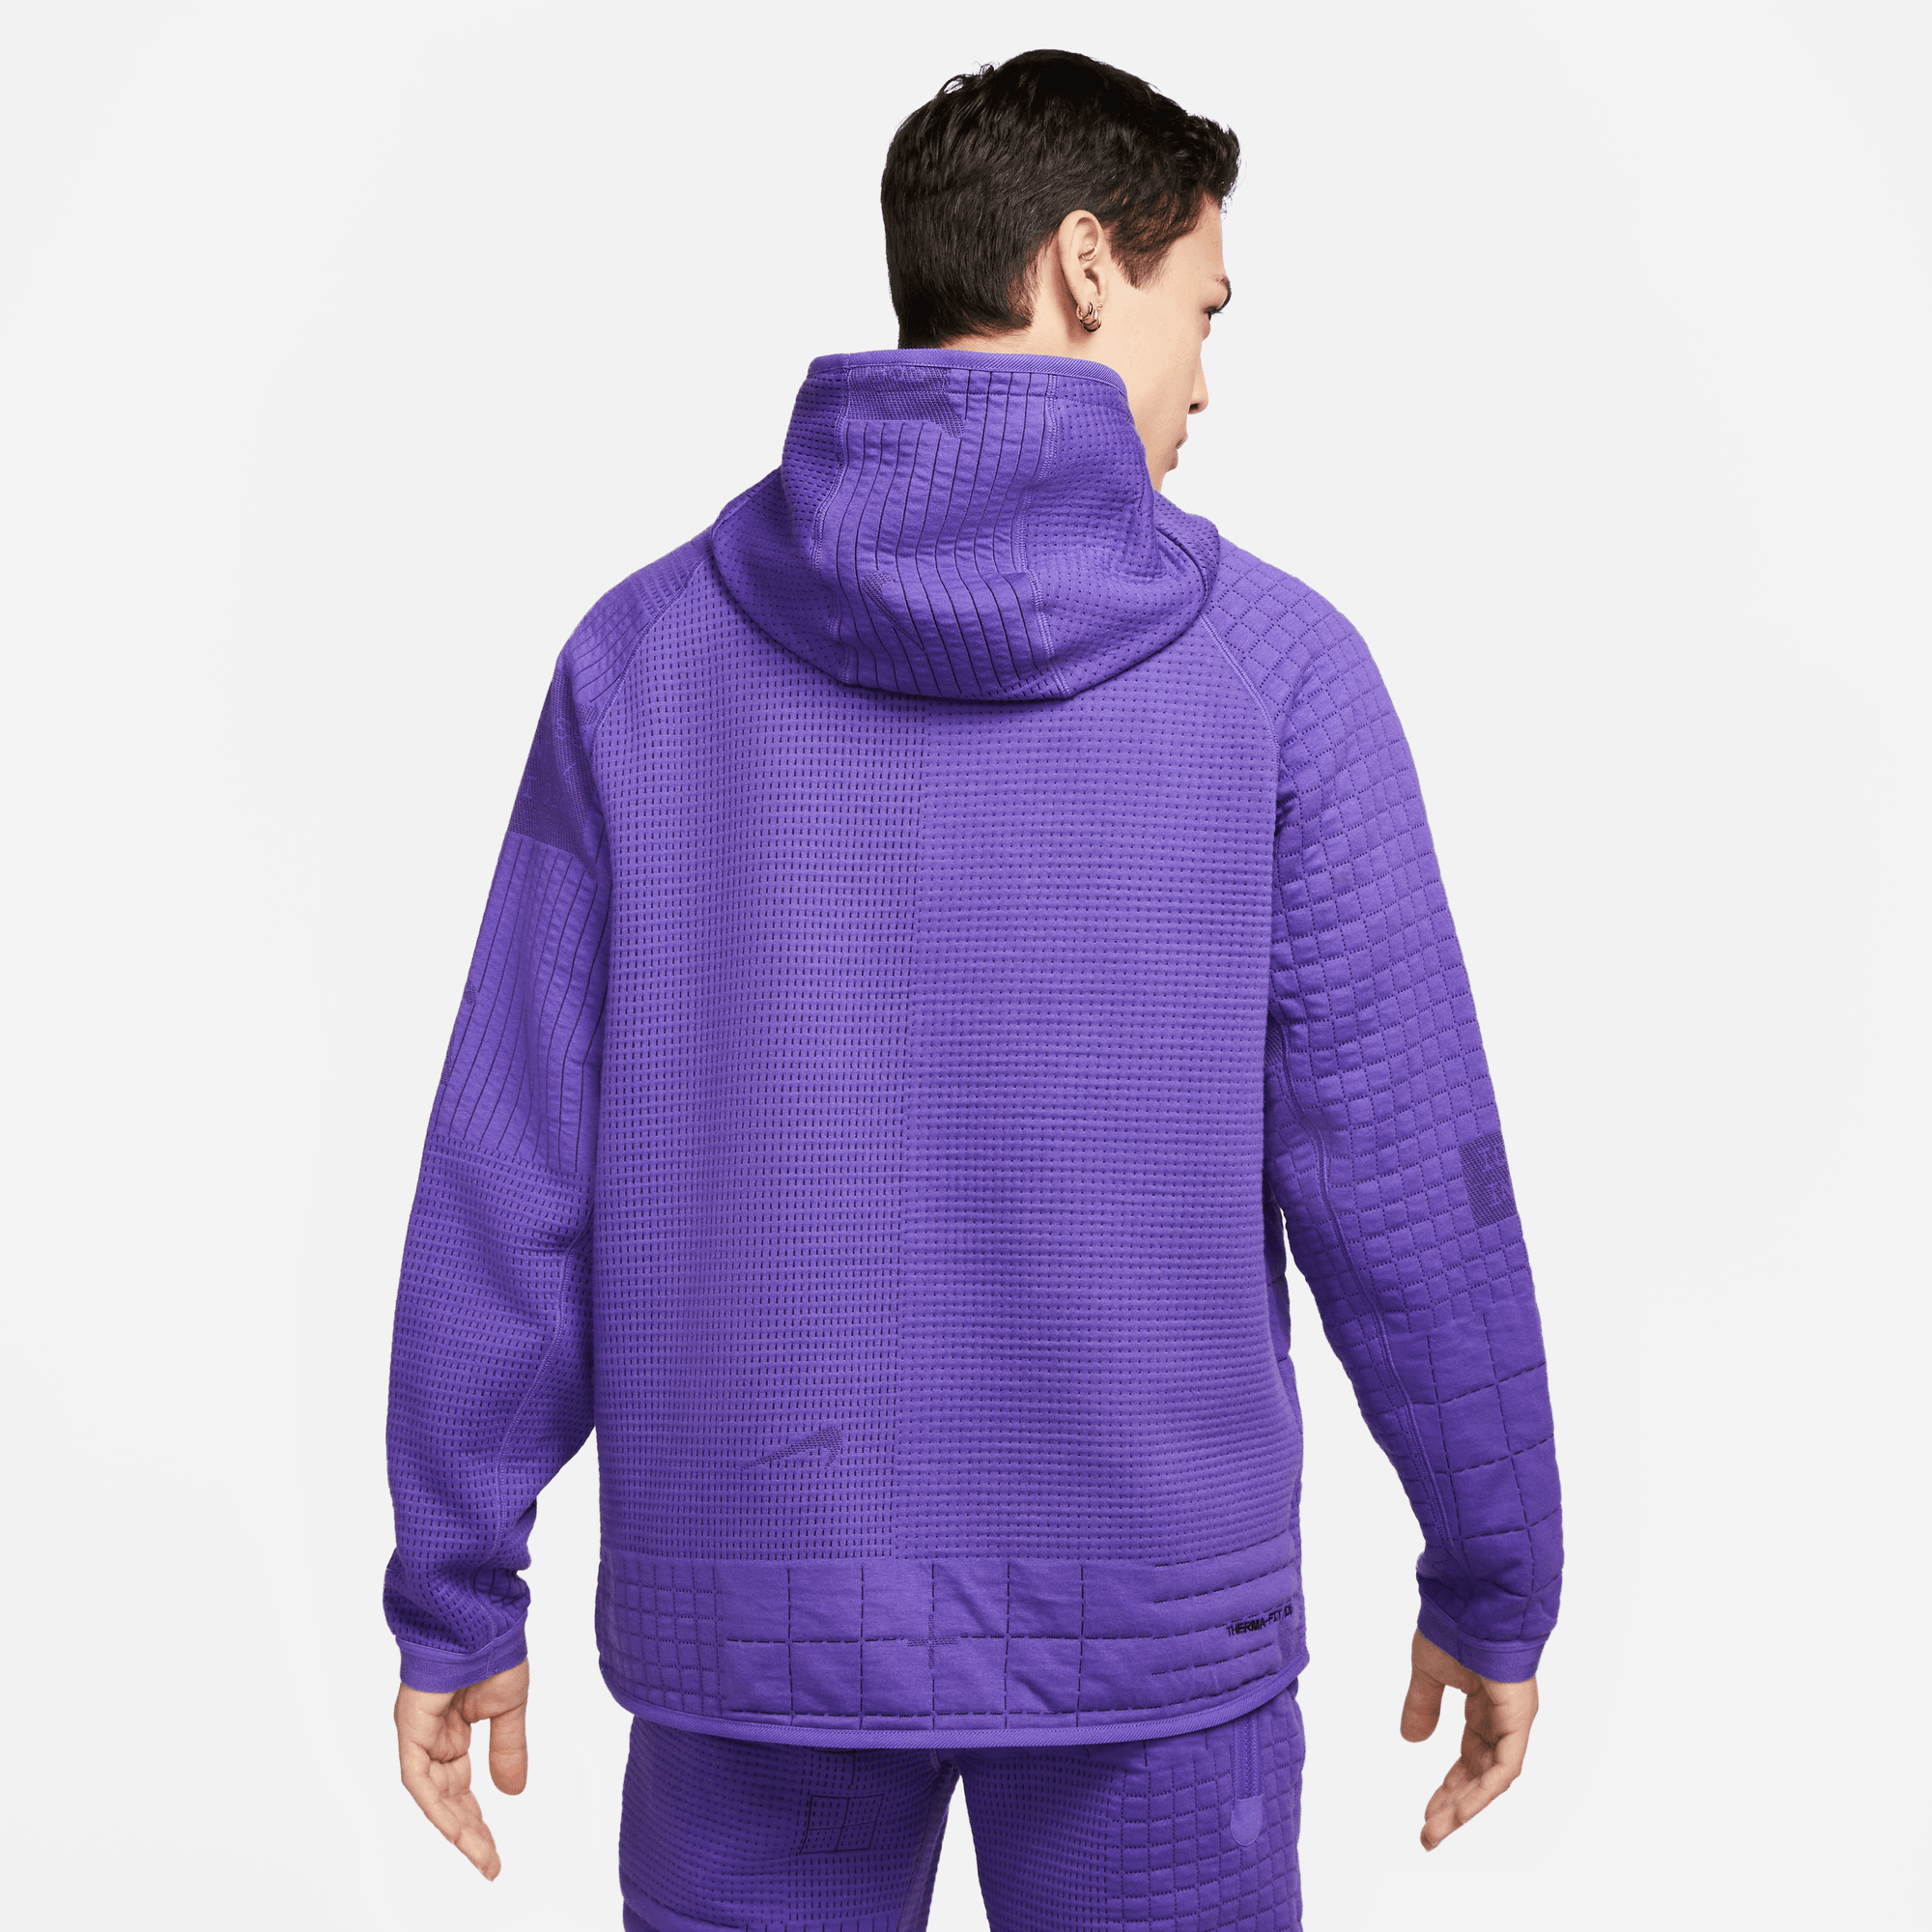 NSW Therma Tech Pullover DM5522-579 Purple